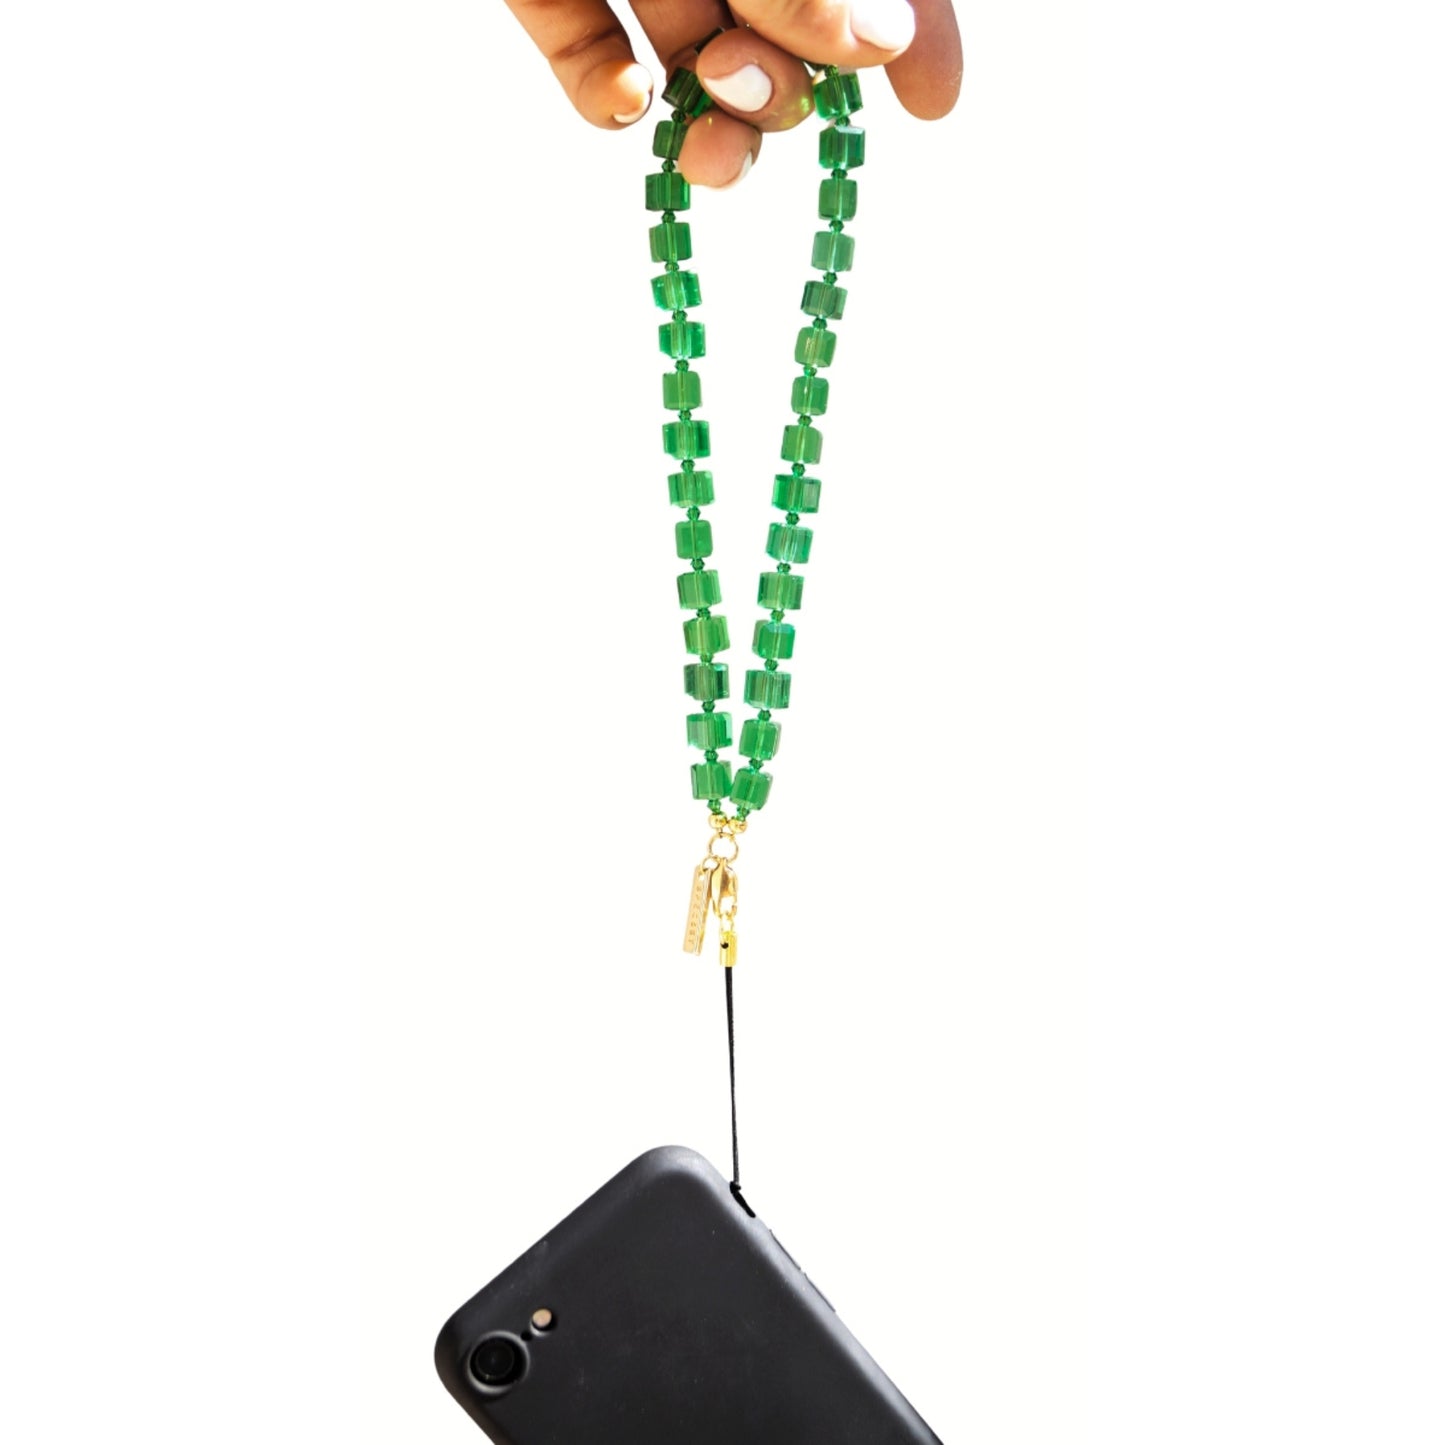 SPARKLY - GREEN Crystal Wrist Phone Strap | SPECSET